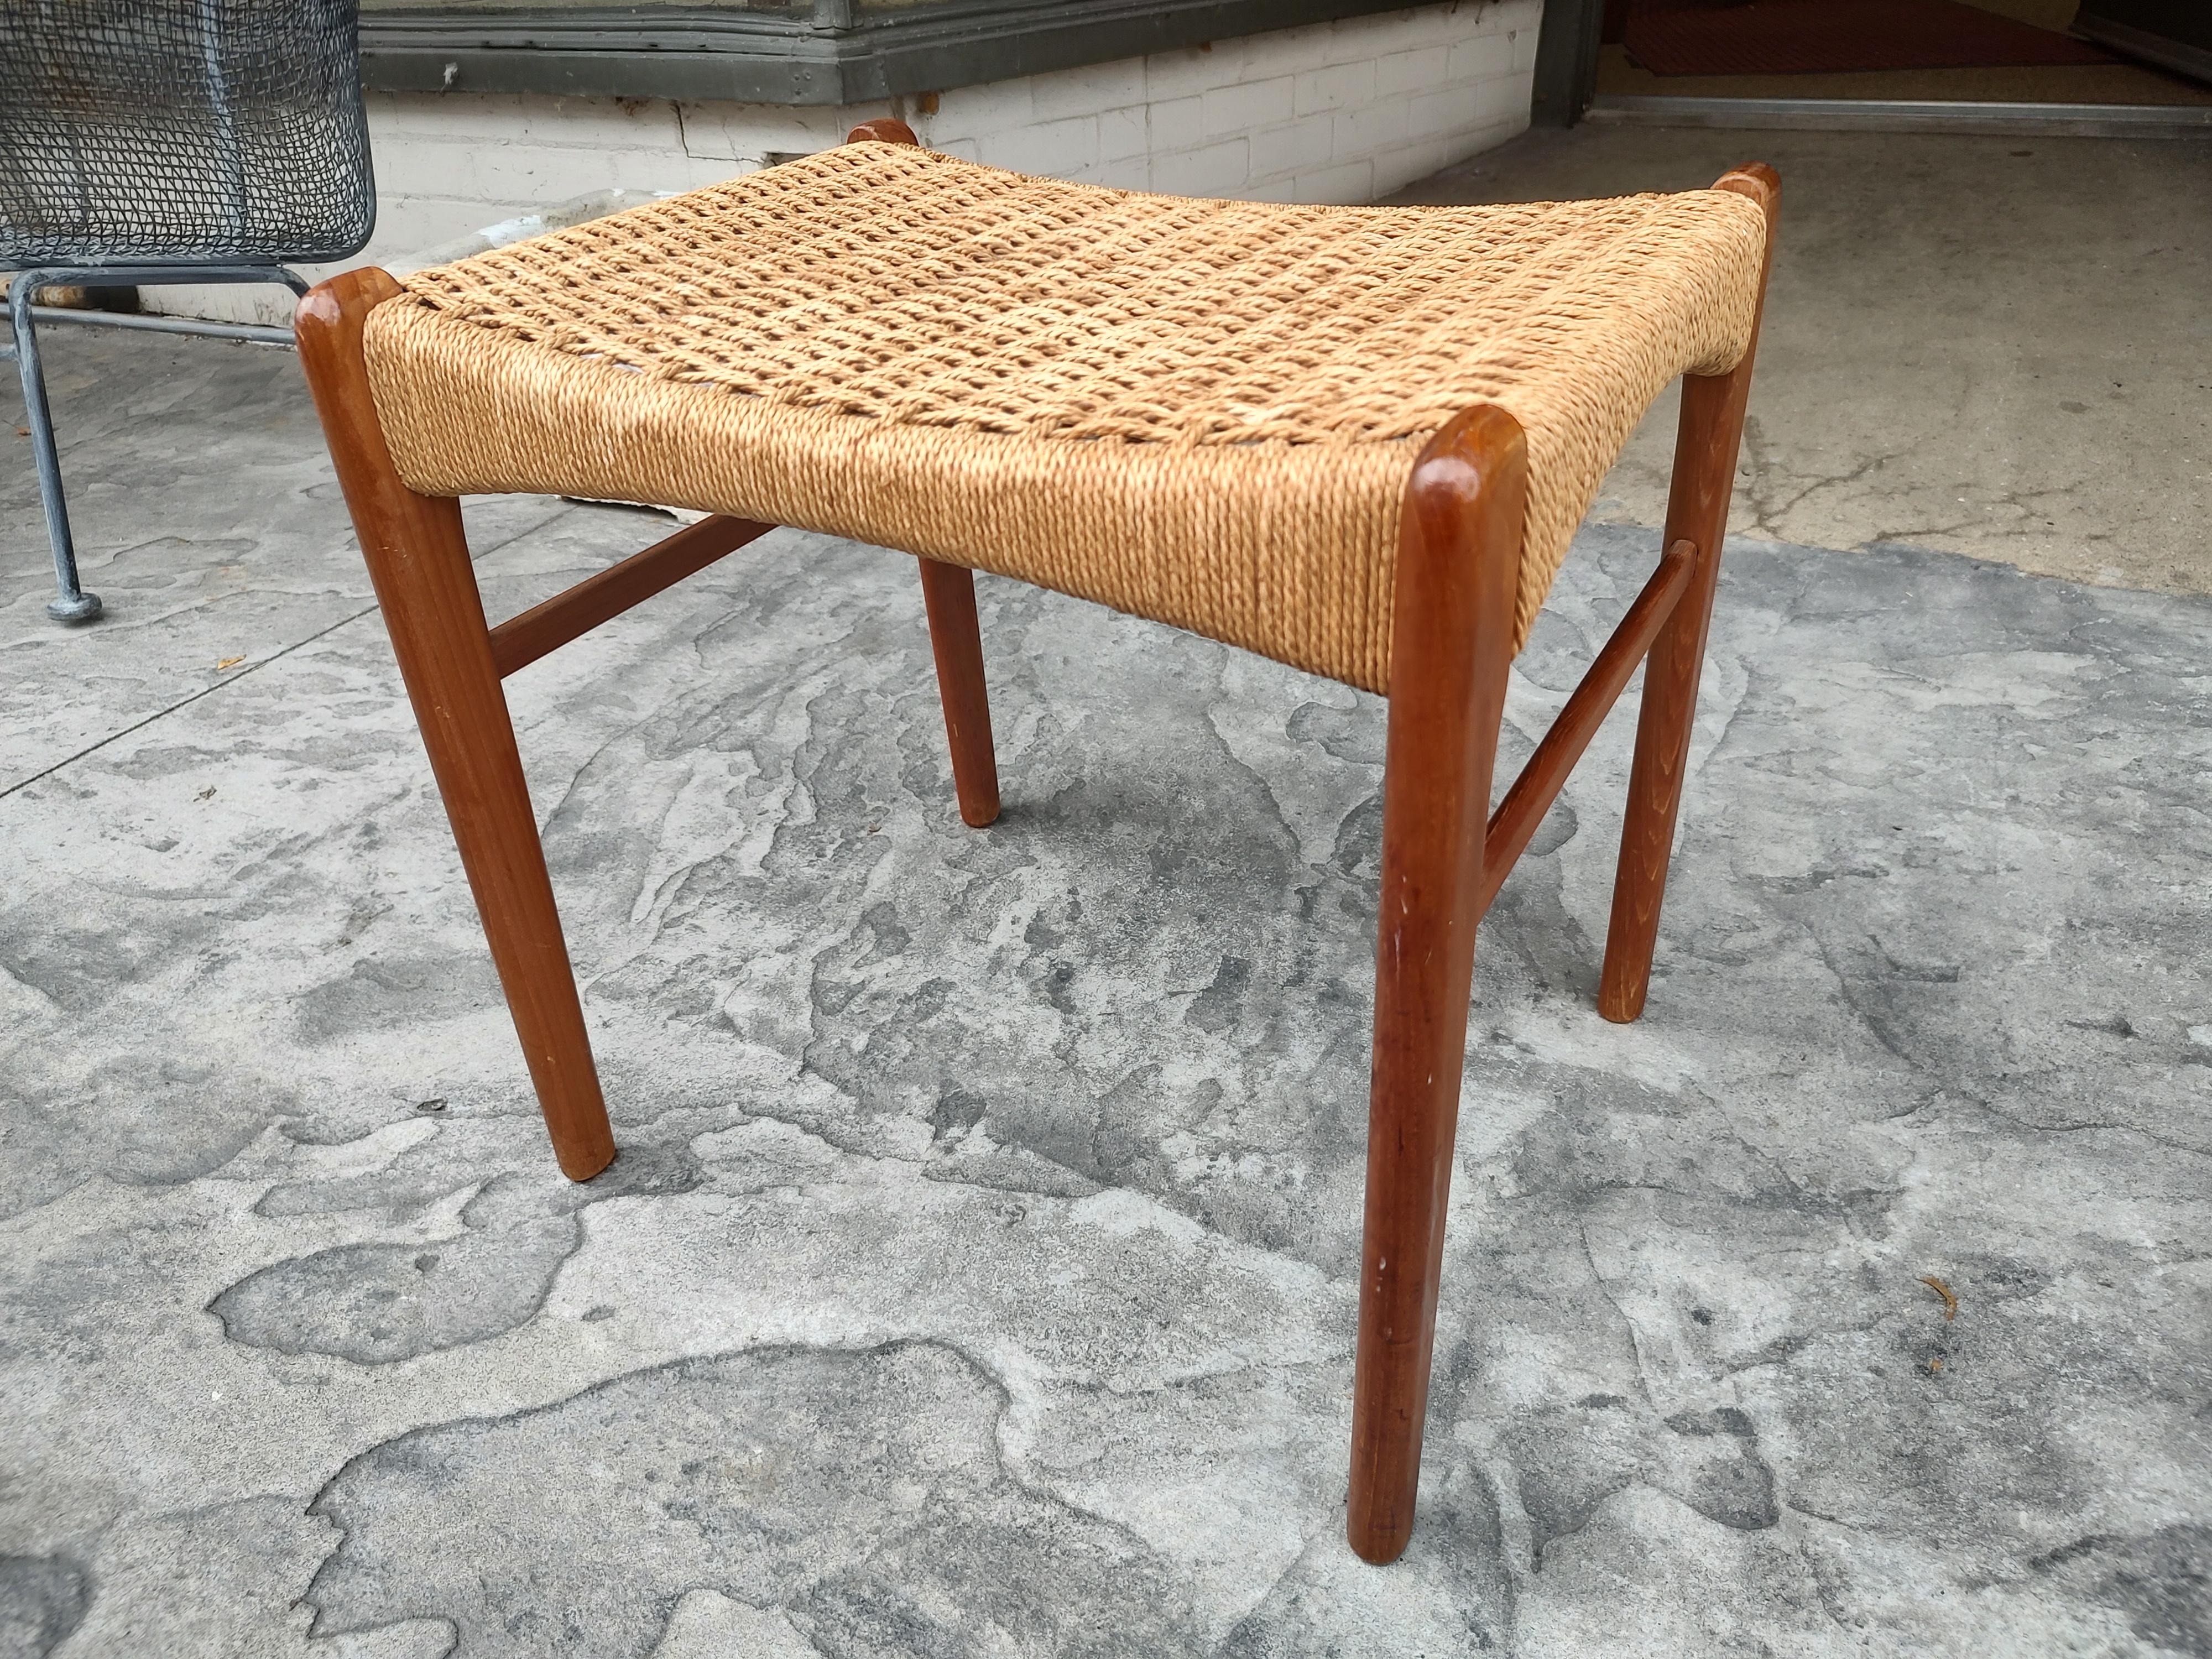 Hand-Crafted Mid-Century Modern Danish Footstool with Woven Paper Cord Seat, 1960 For Sale